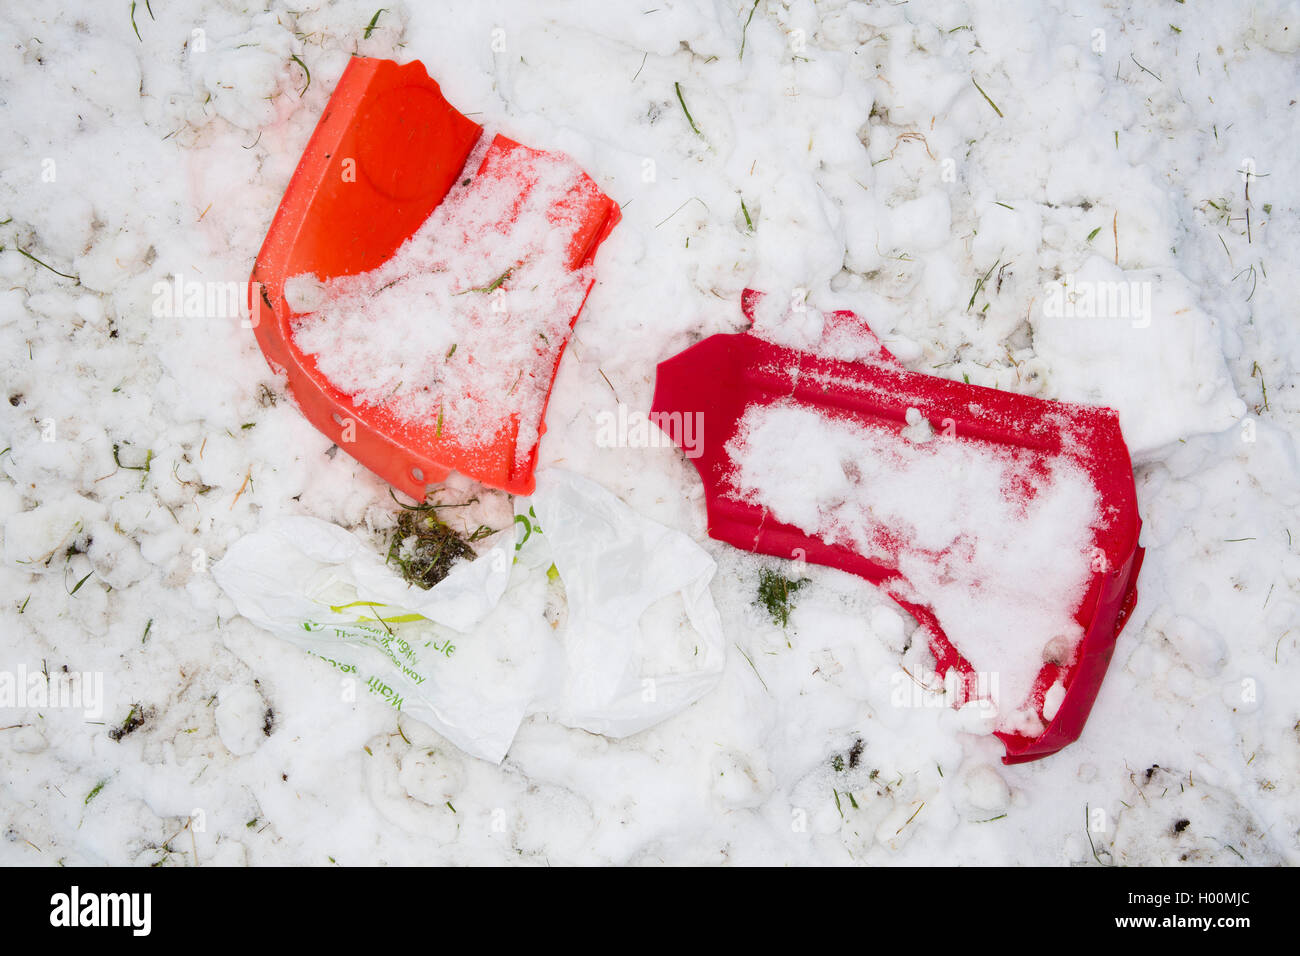 Broken sledges, trays and other pieces of rubbish litter the Roman Amphitheatre in Cirencester, Gloucestsershire Uk. The items have been left after days of sledging and playing in the snow, leaving the area looking like a battleground. Stock Photo